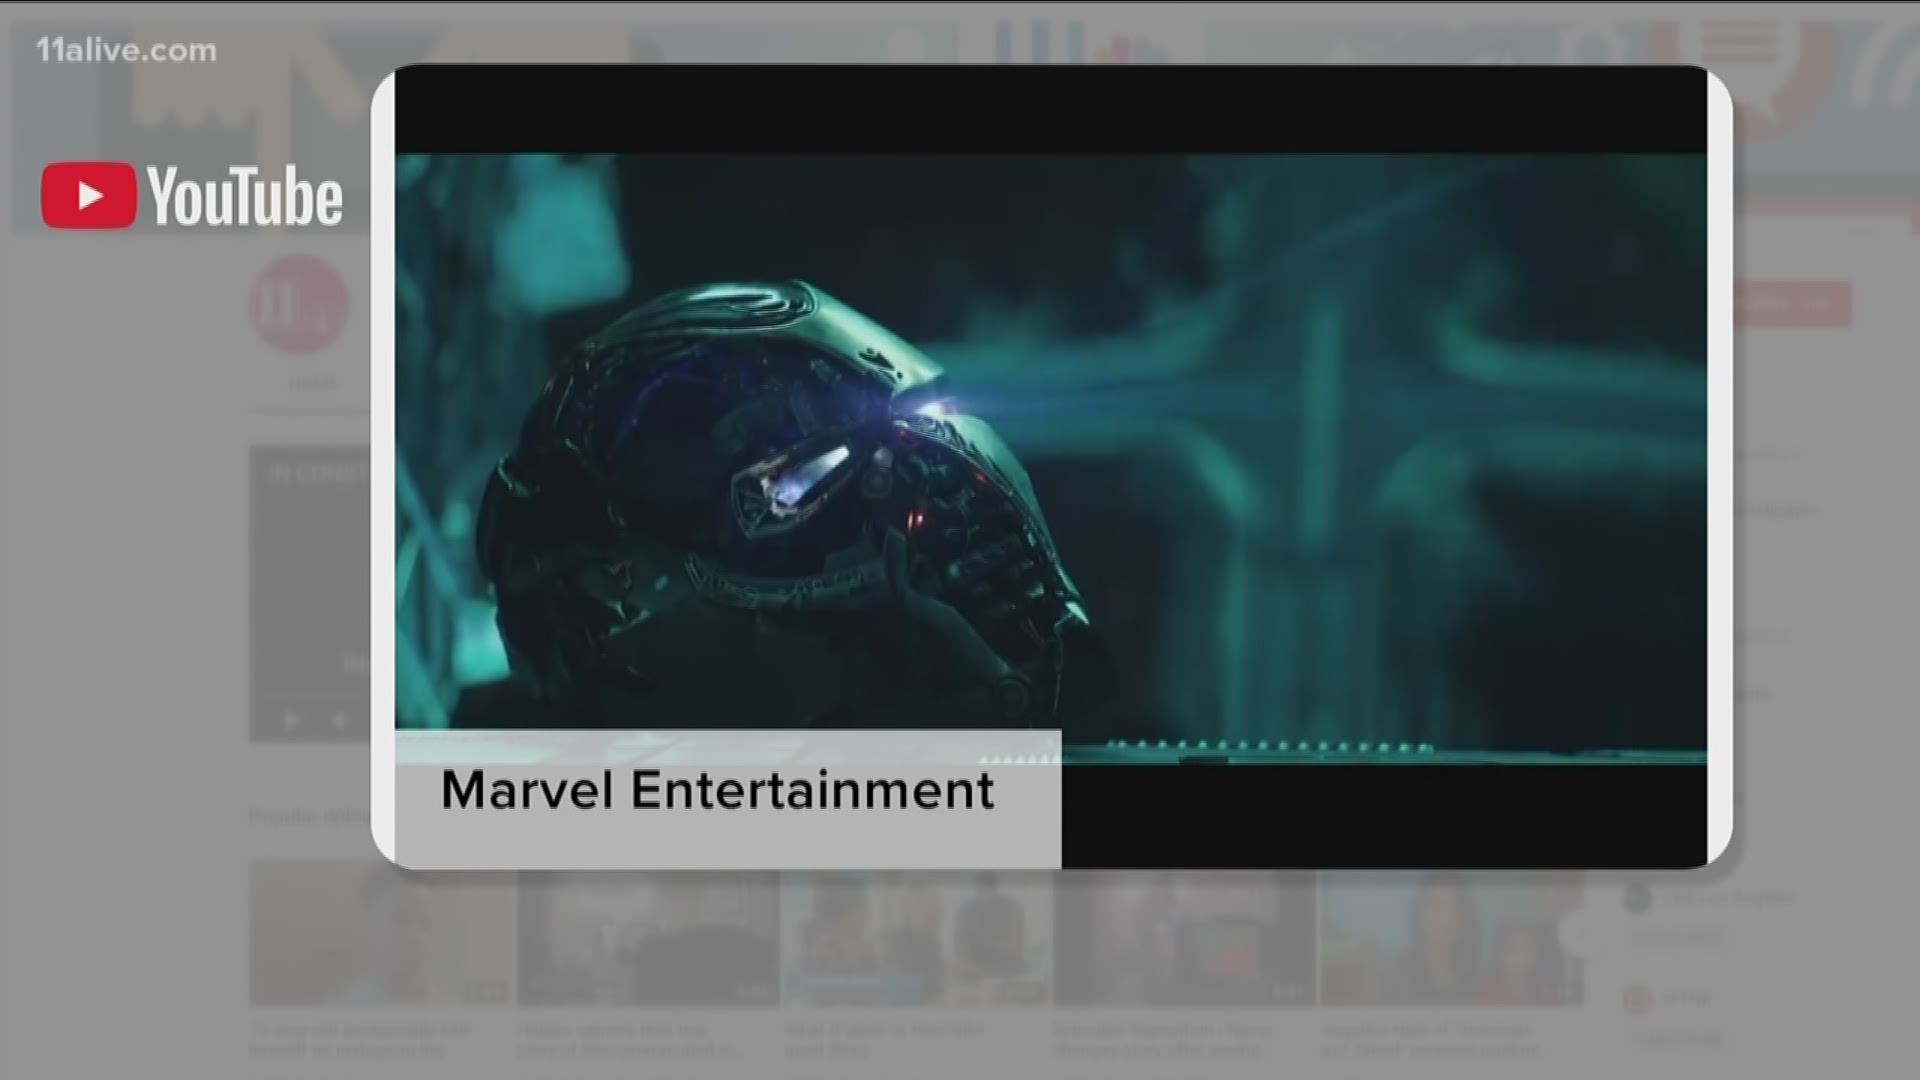 If this is true, this will be the longest Marvel film ever.